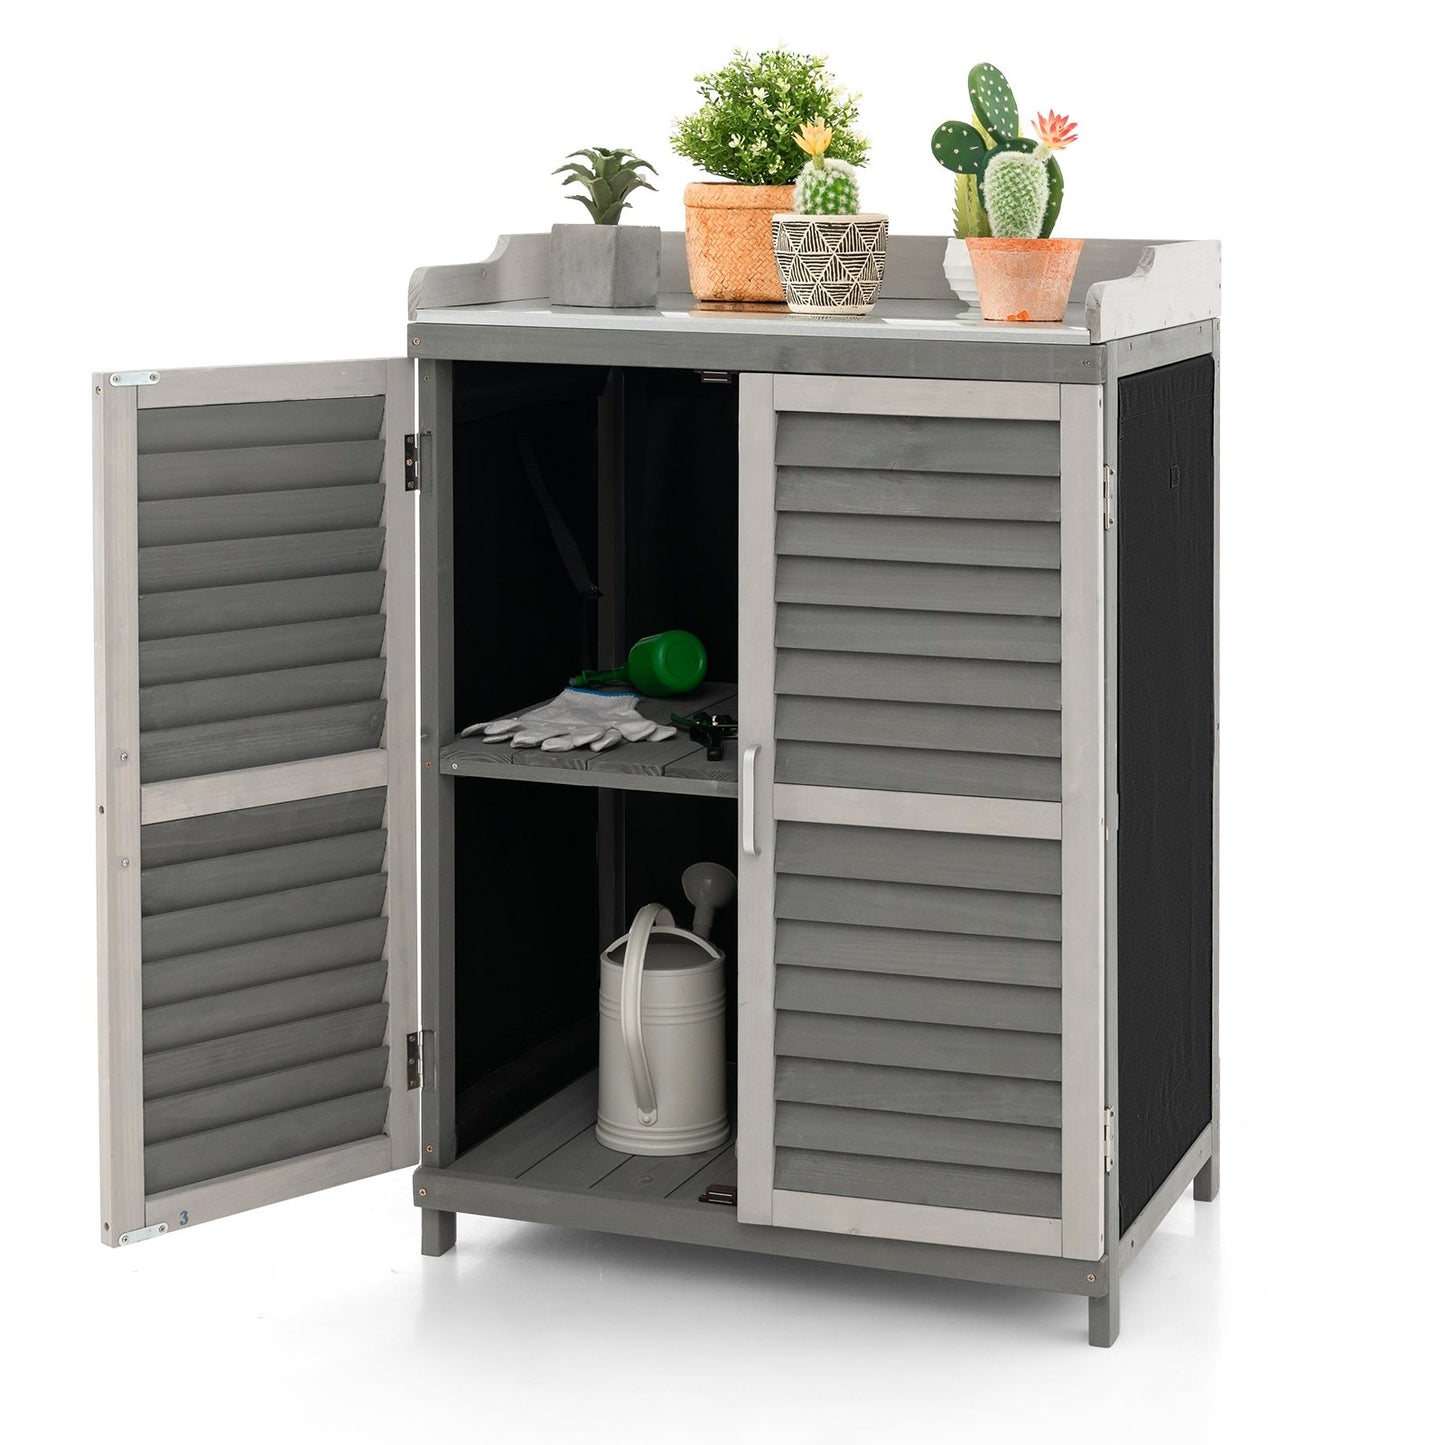 Garden Potting Bench Table with 2 Storage Shelves and Metal Plated Tabletop, Gray